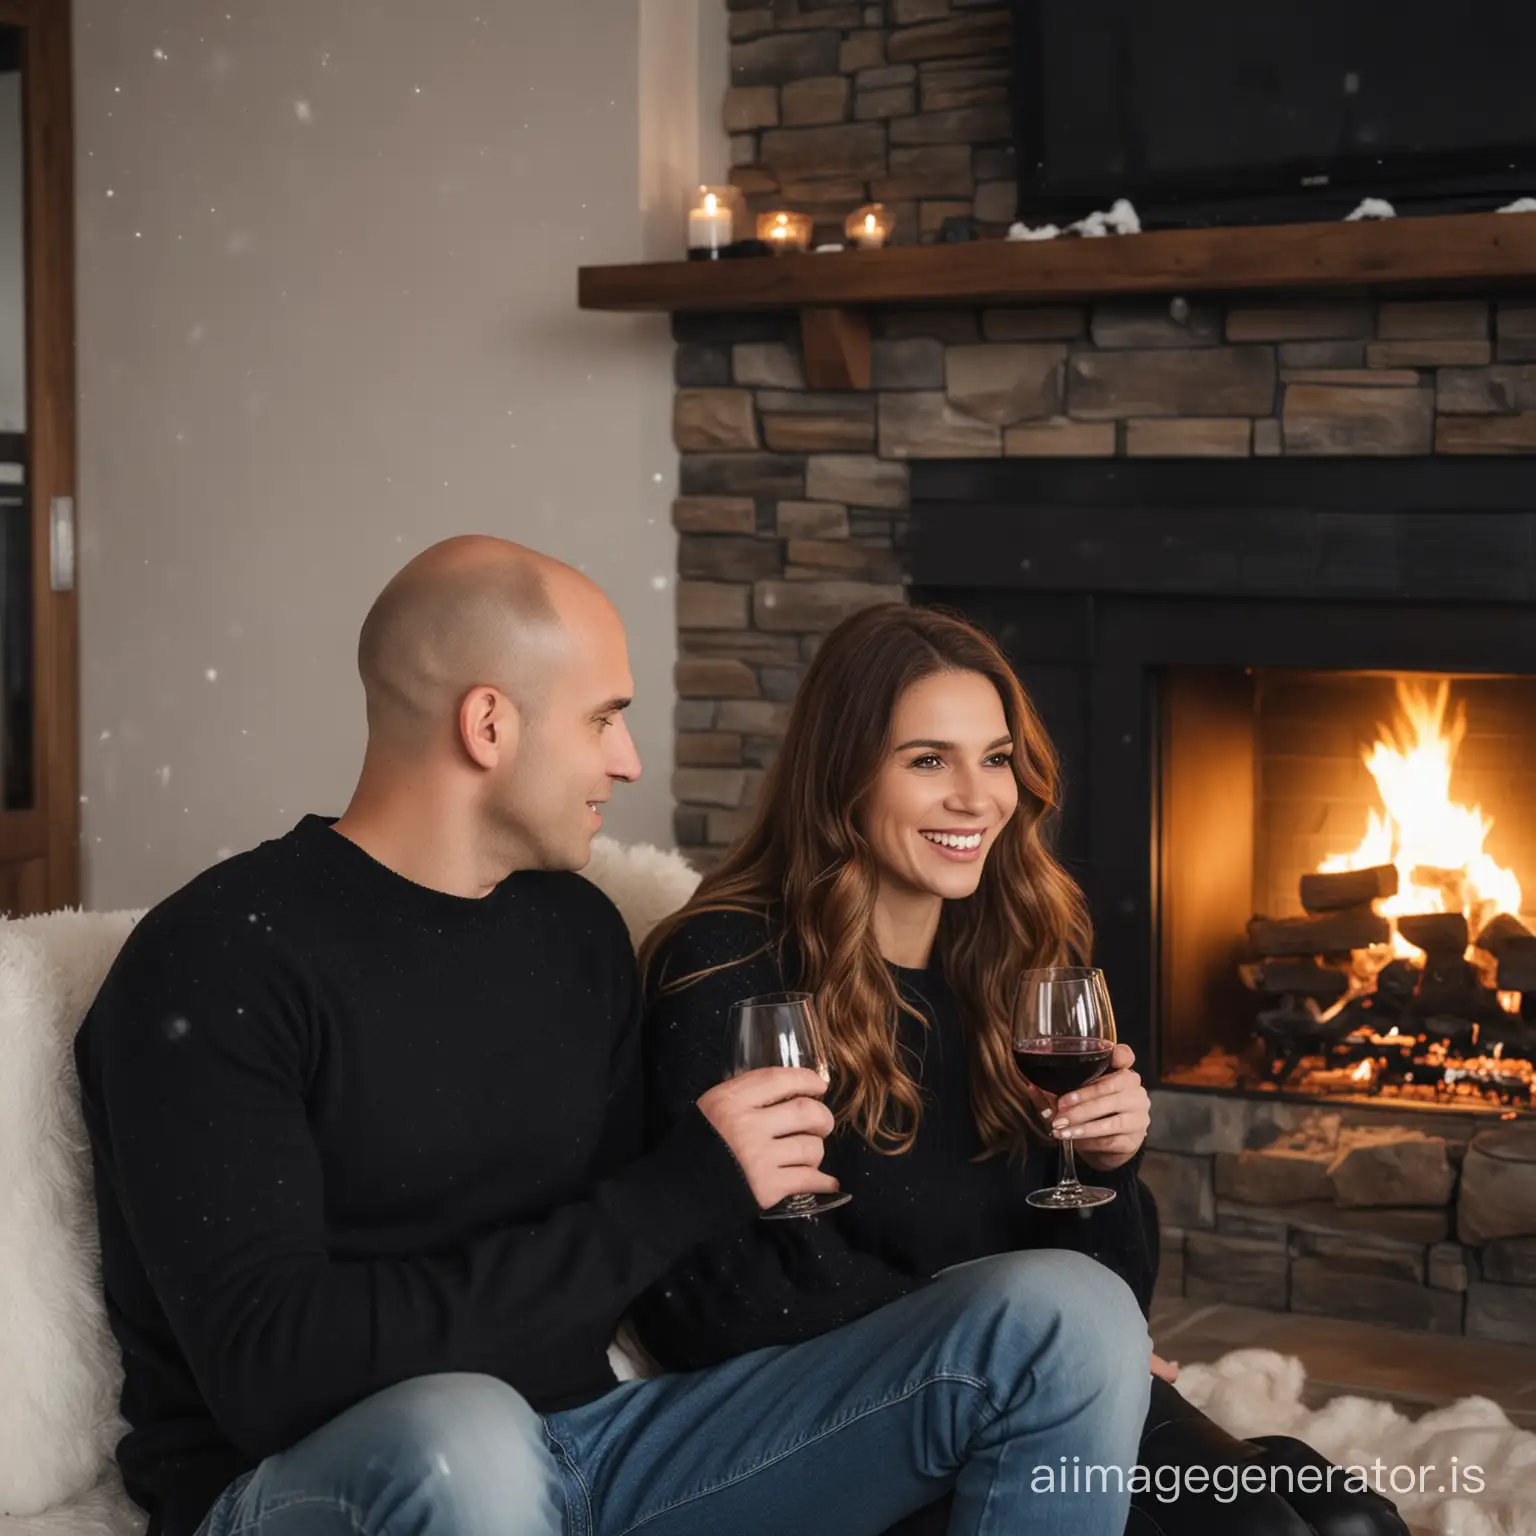 Cozy-Winter-Evening-Bald-Man-and-Woman-with-Wine-by-the-Fireplace